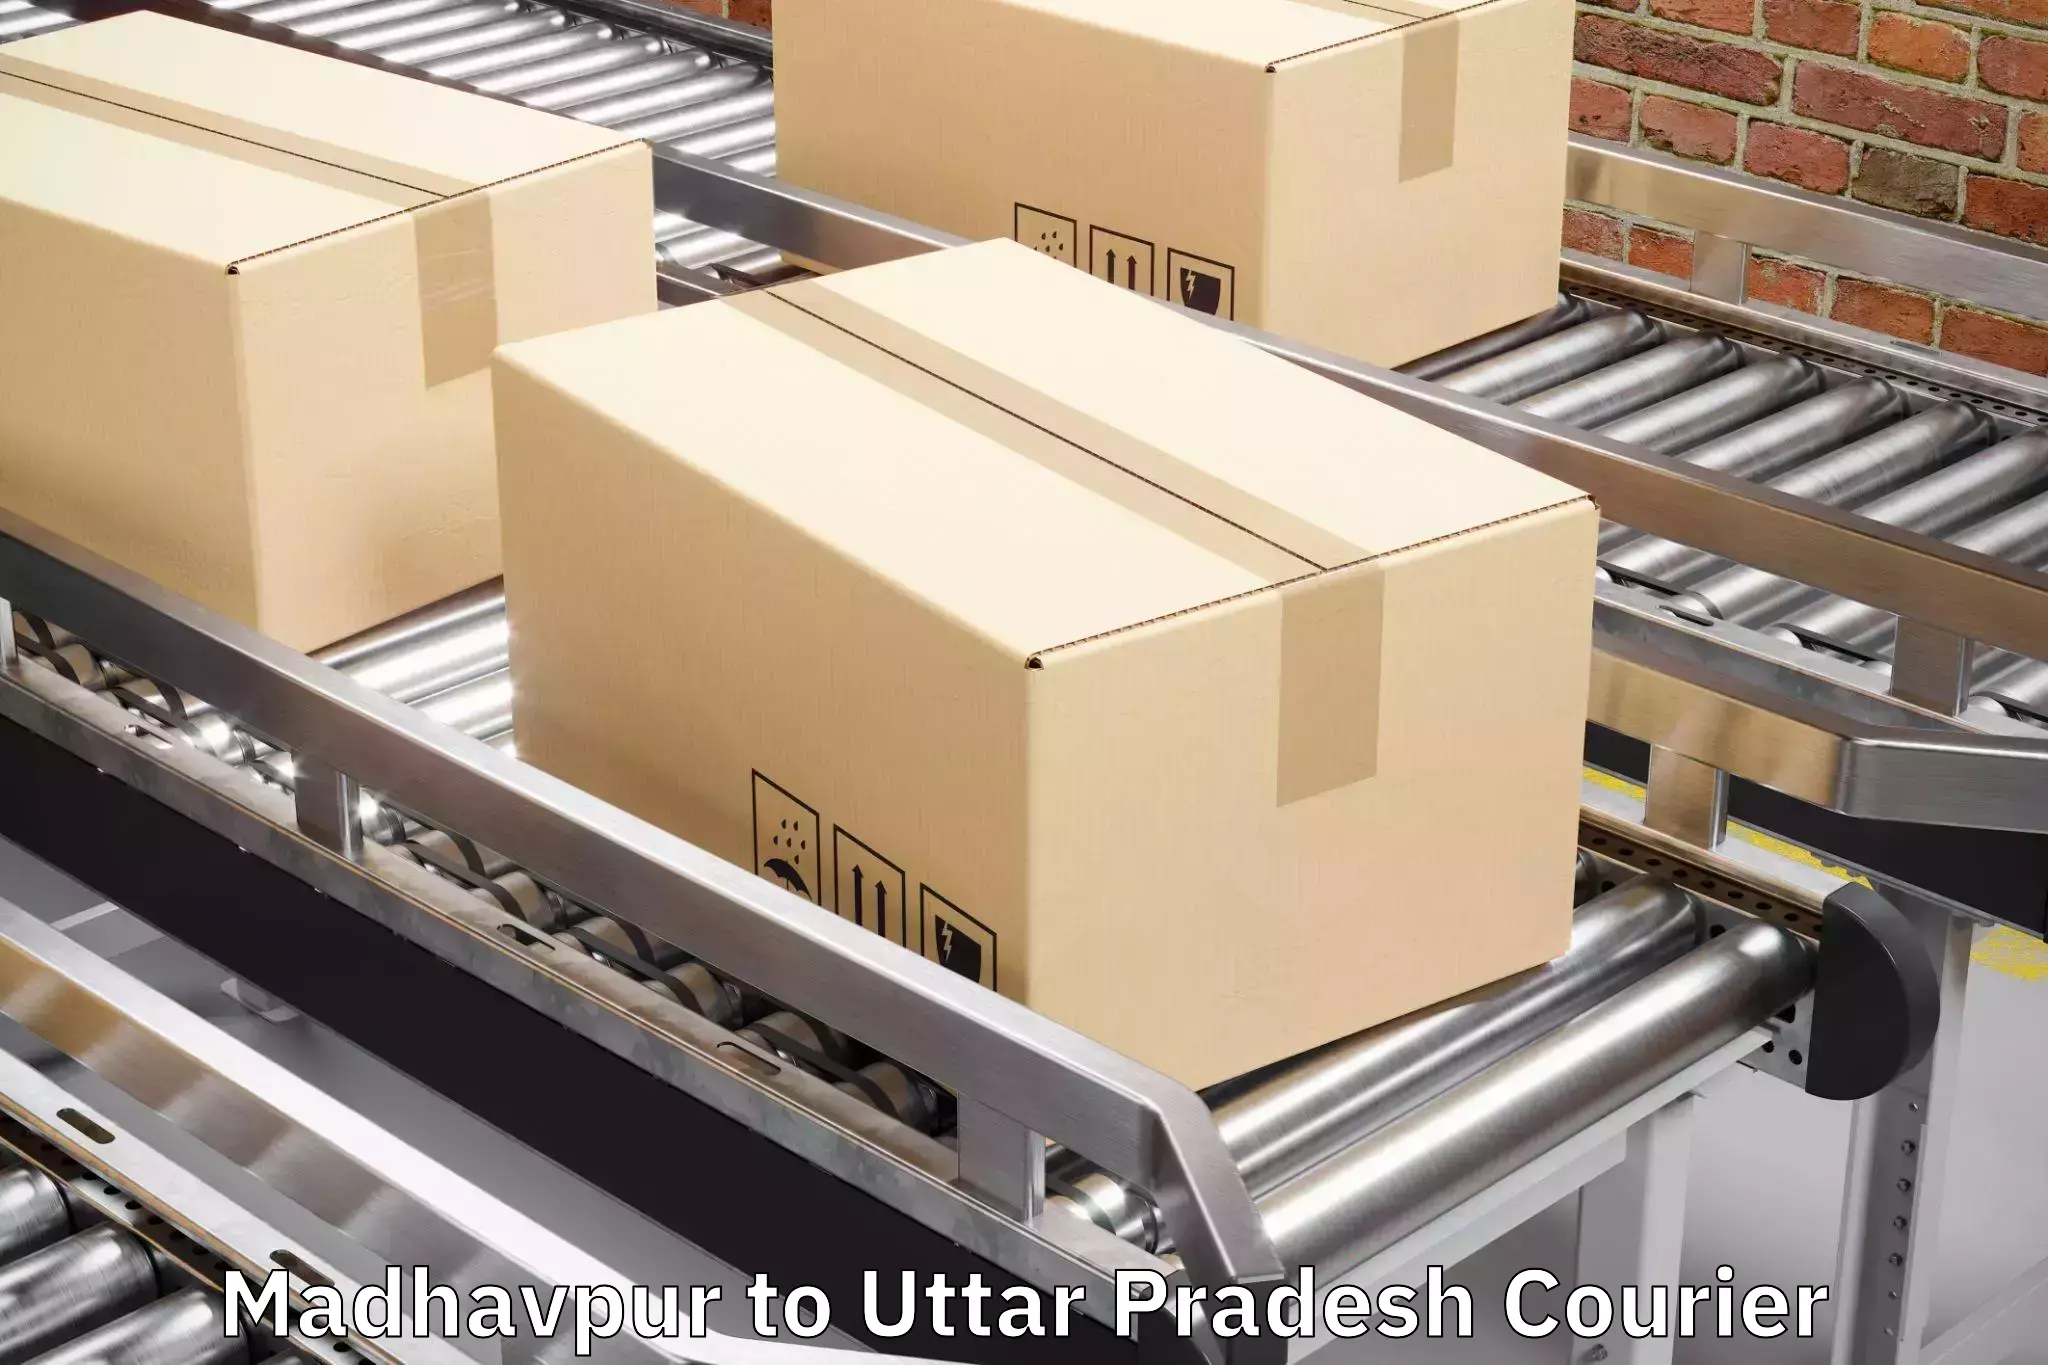 Baggage delivery technology Madhavpur to Ambedkar Nagar